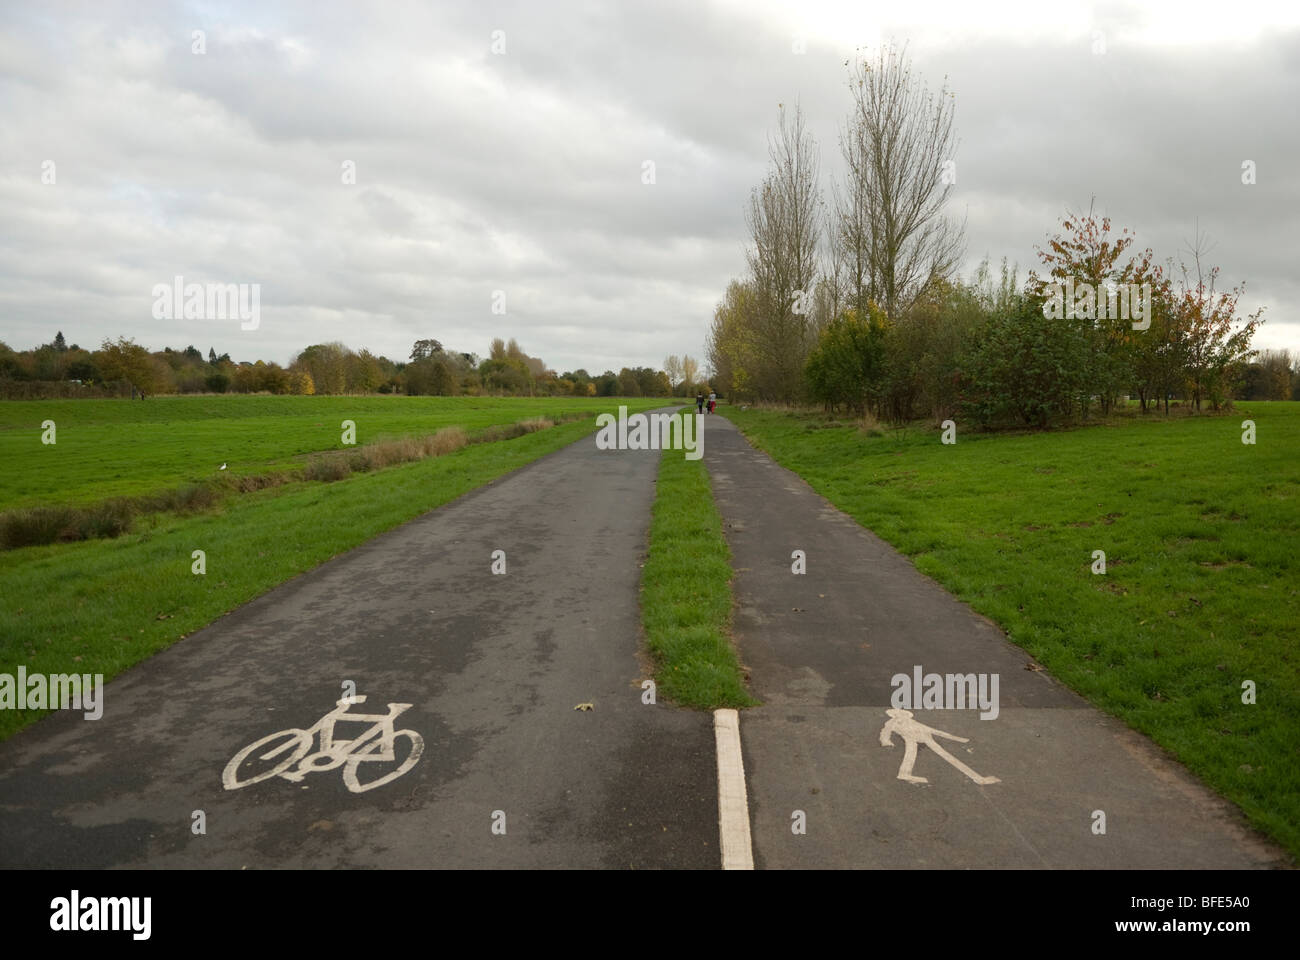 Bicycle and pedestrian lane disappearing into the distance, Exeter, Devon, England, UK Stock Photo